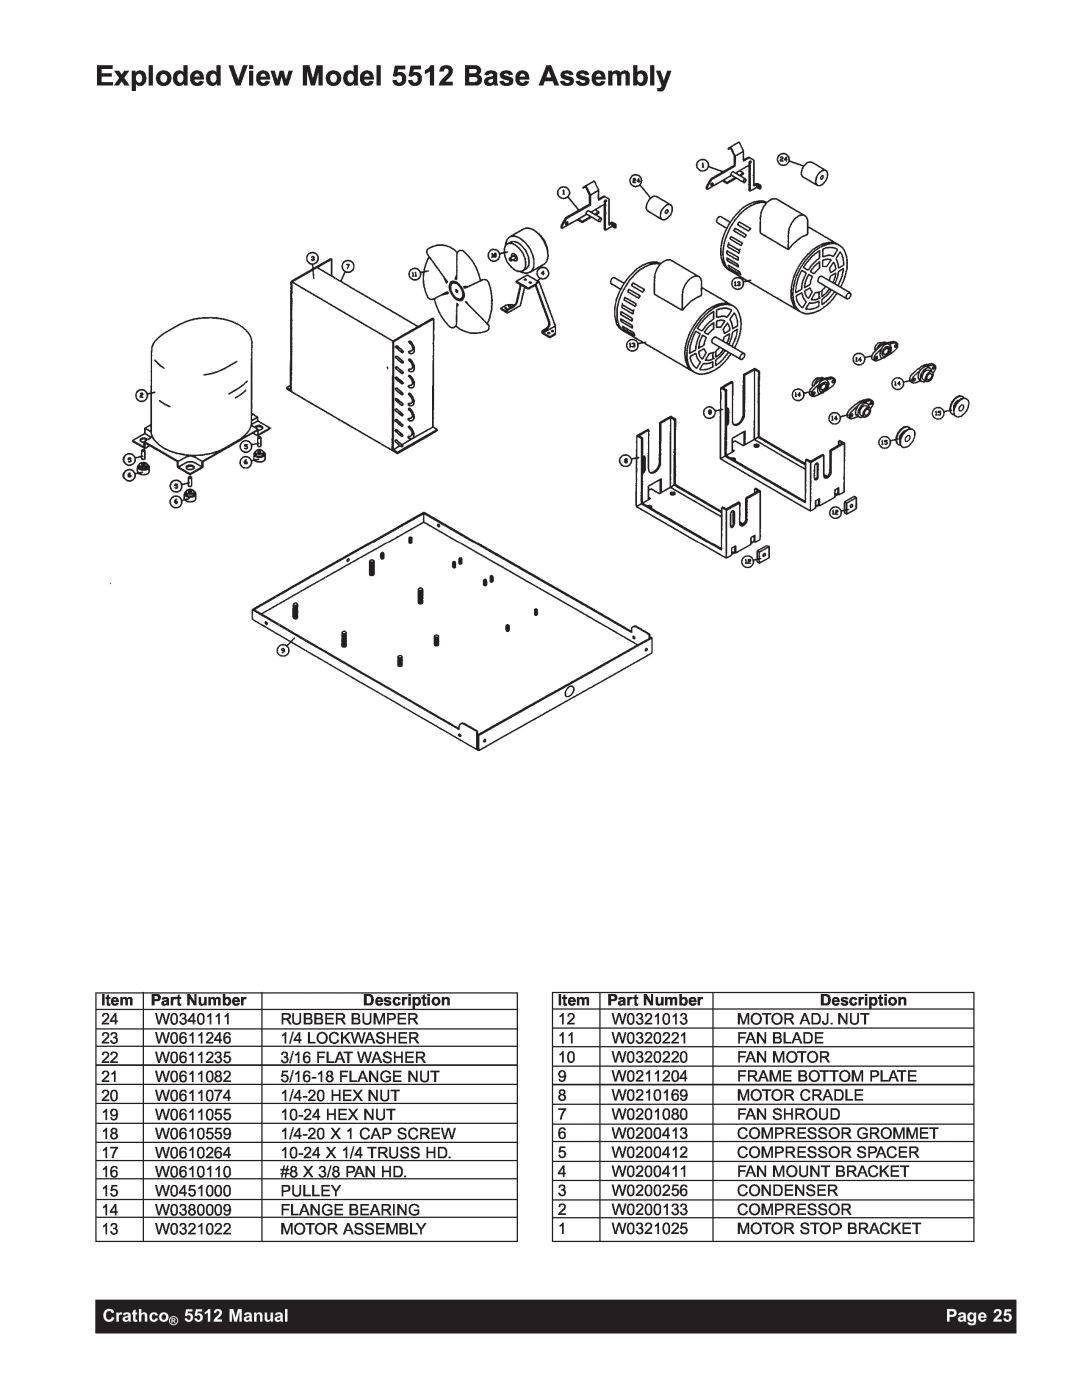 Grindmaster 5512E instruction manual Exploded View Model 5512 Base Assembly, Crathco 5512 Manual, Page 